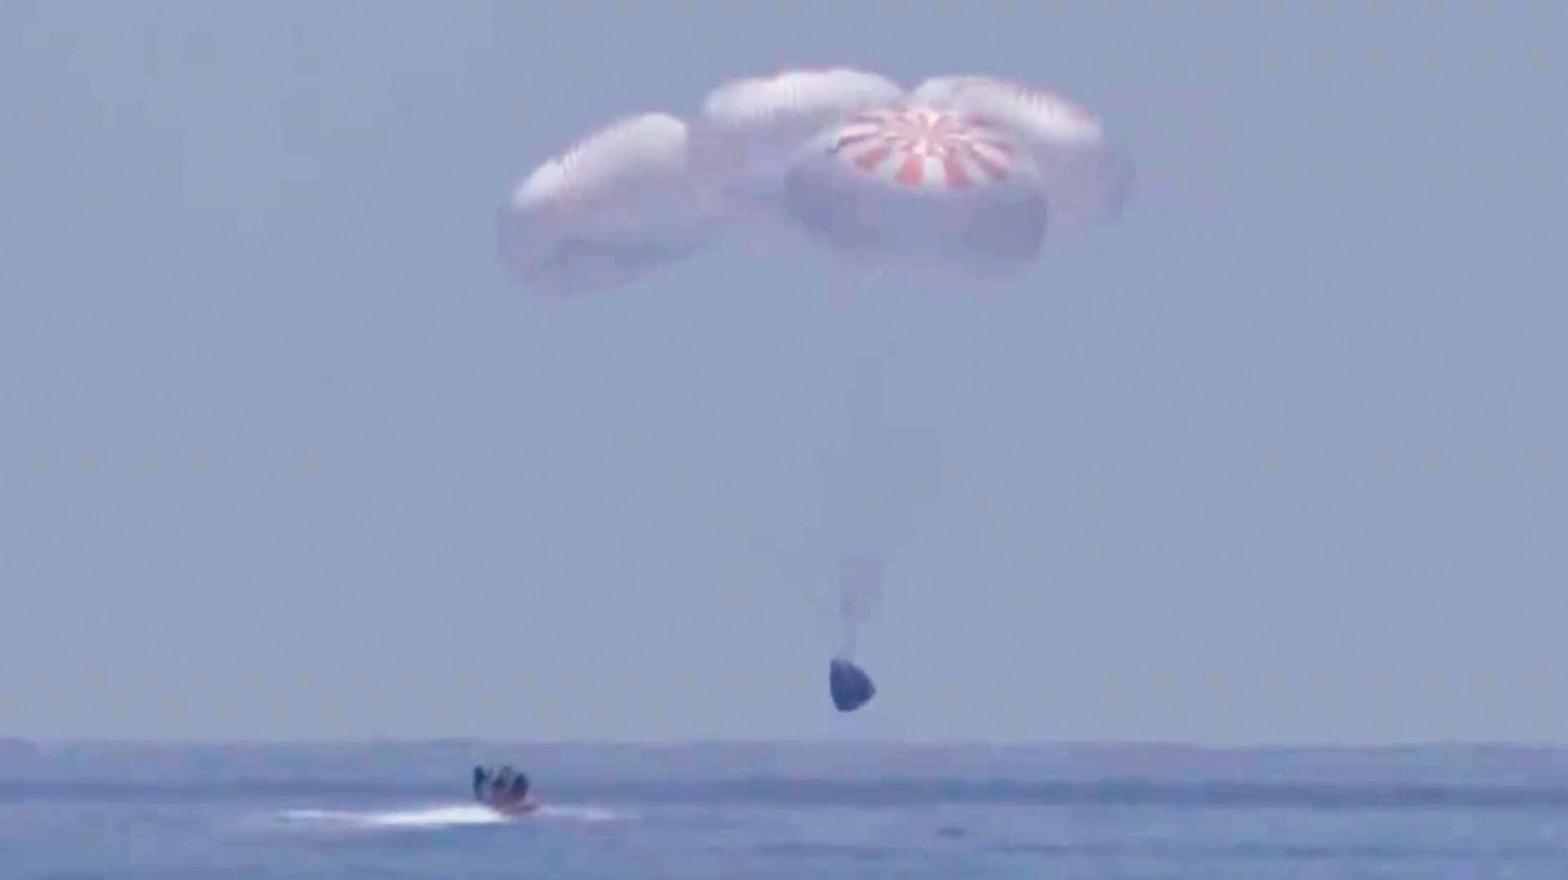 NASA astronauts Bob Behnken and Doug Hurley made a successful water landing in SpaceX's Crew Dragon spacecraft just outside Pensacola, Florida, shortly before 3 p.m. ET Sunday. (Photo: NASA)